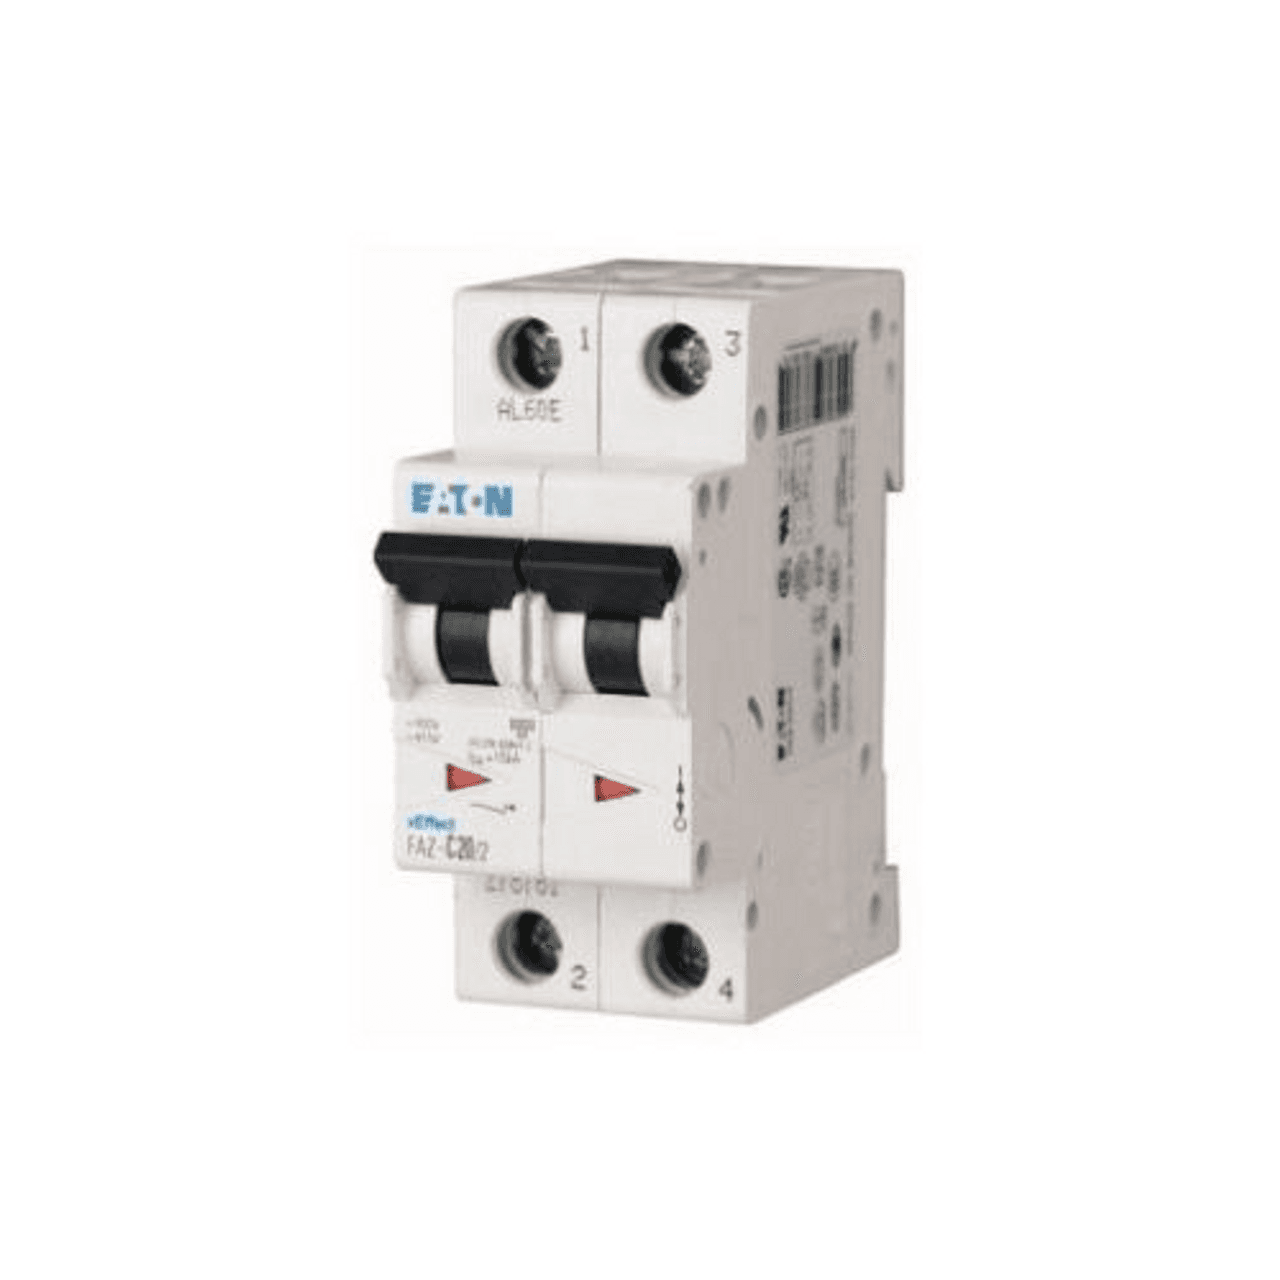 Eaton FAZ-C5/2 Eaton FAZ supplementary protector,UL 1077 Industrial miniature circuit breaker - supplementary protector,Medium levels of inrush current are expected,5 A,15 kAIC,Two-pole,5-10X /n,50-60 Hz,Standard terminals,C Curve